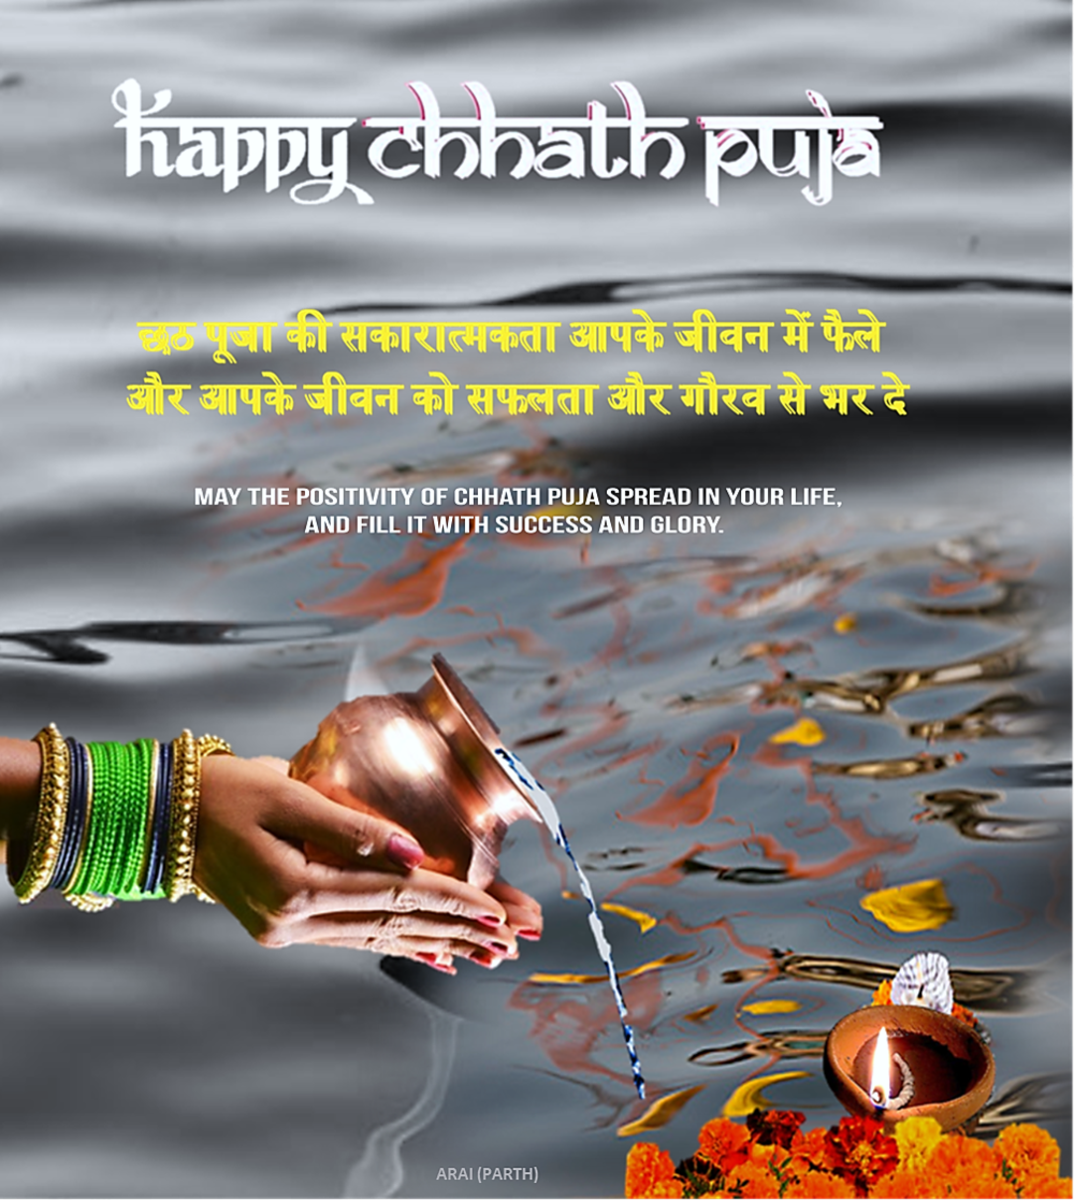 chhath-puja-wishes-and-greetings-in-hindi-language